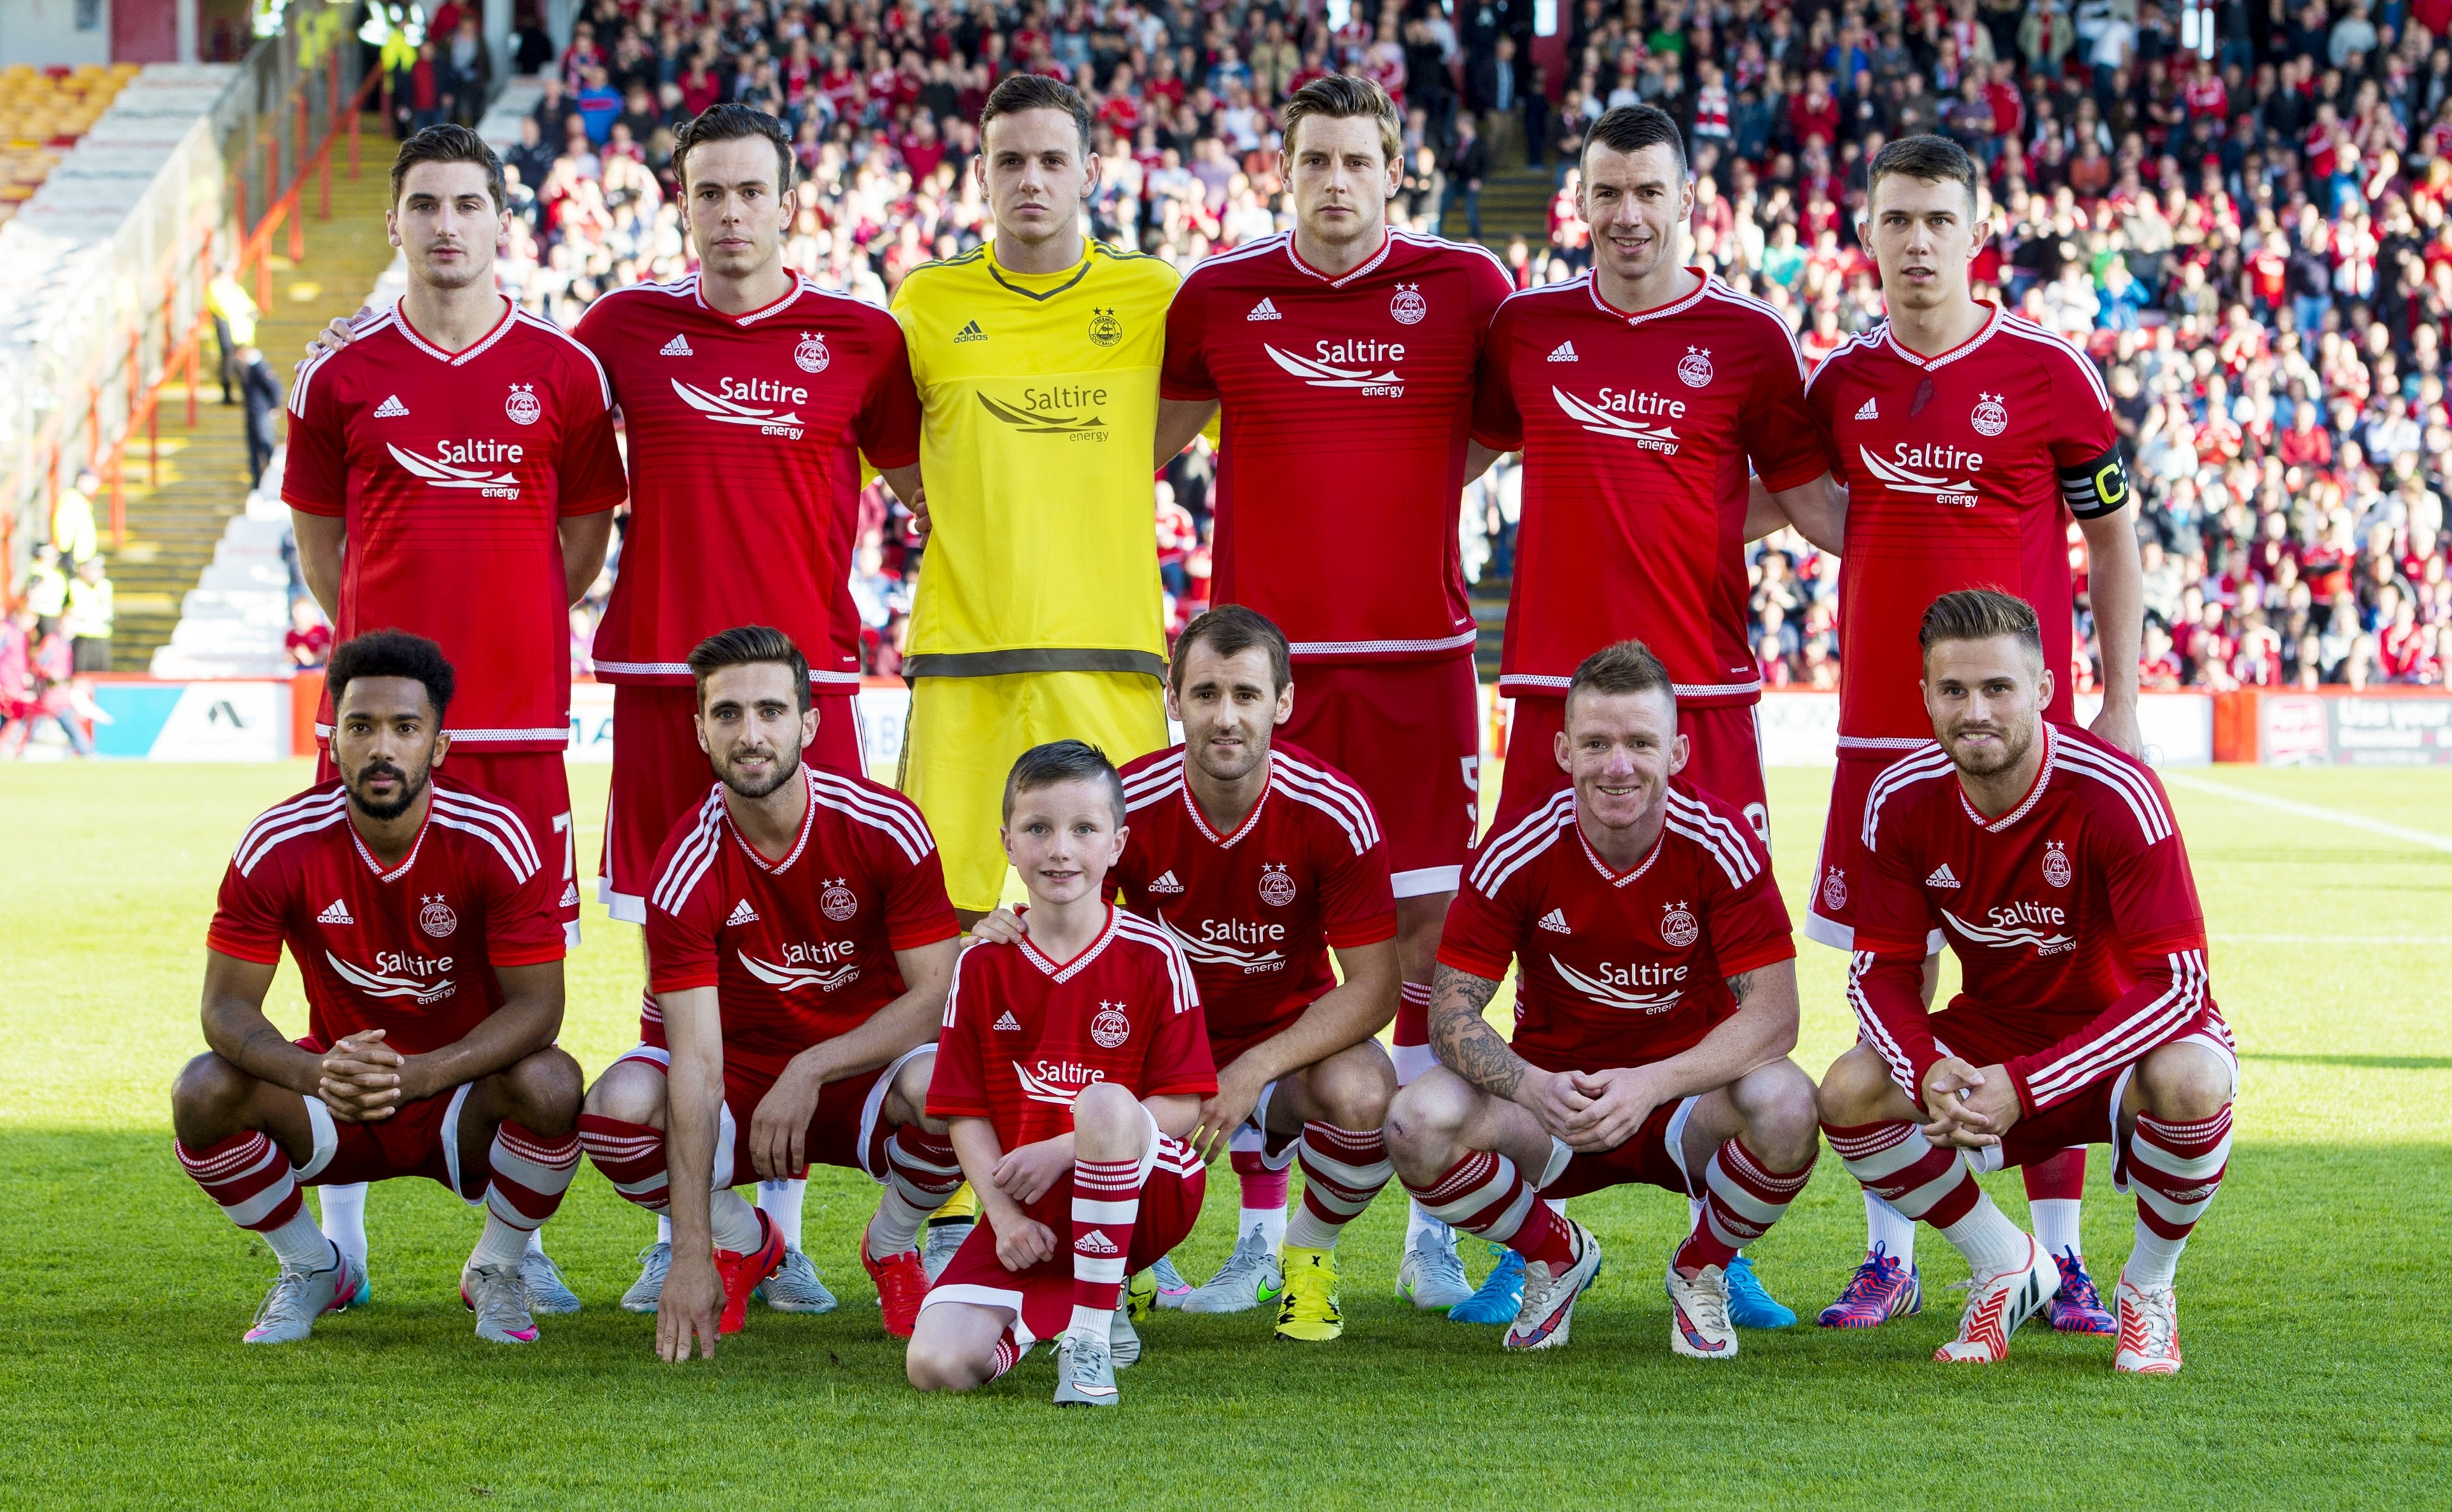 The Dons line up ahead of the match 